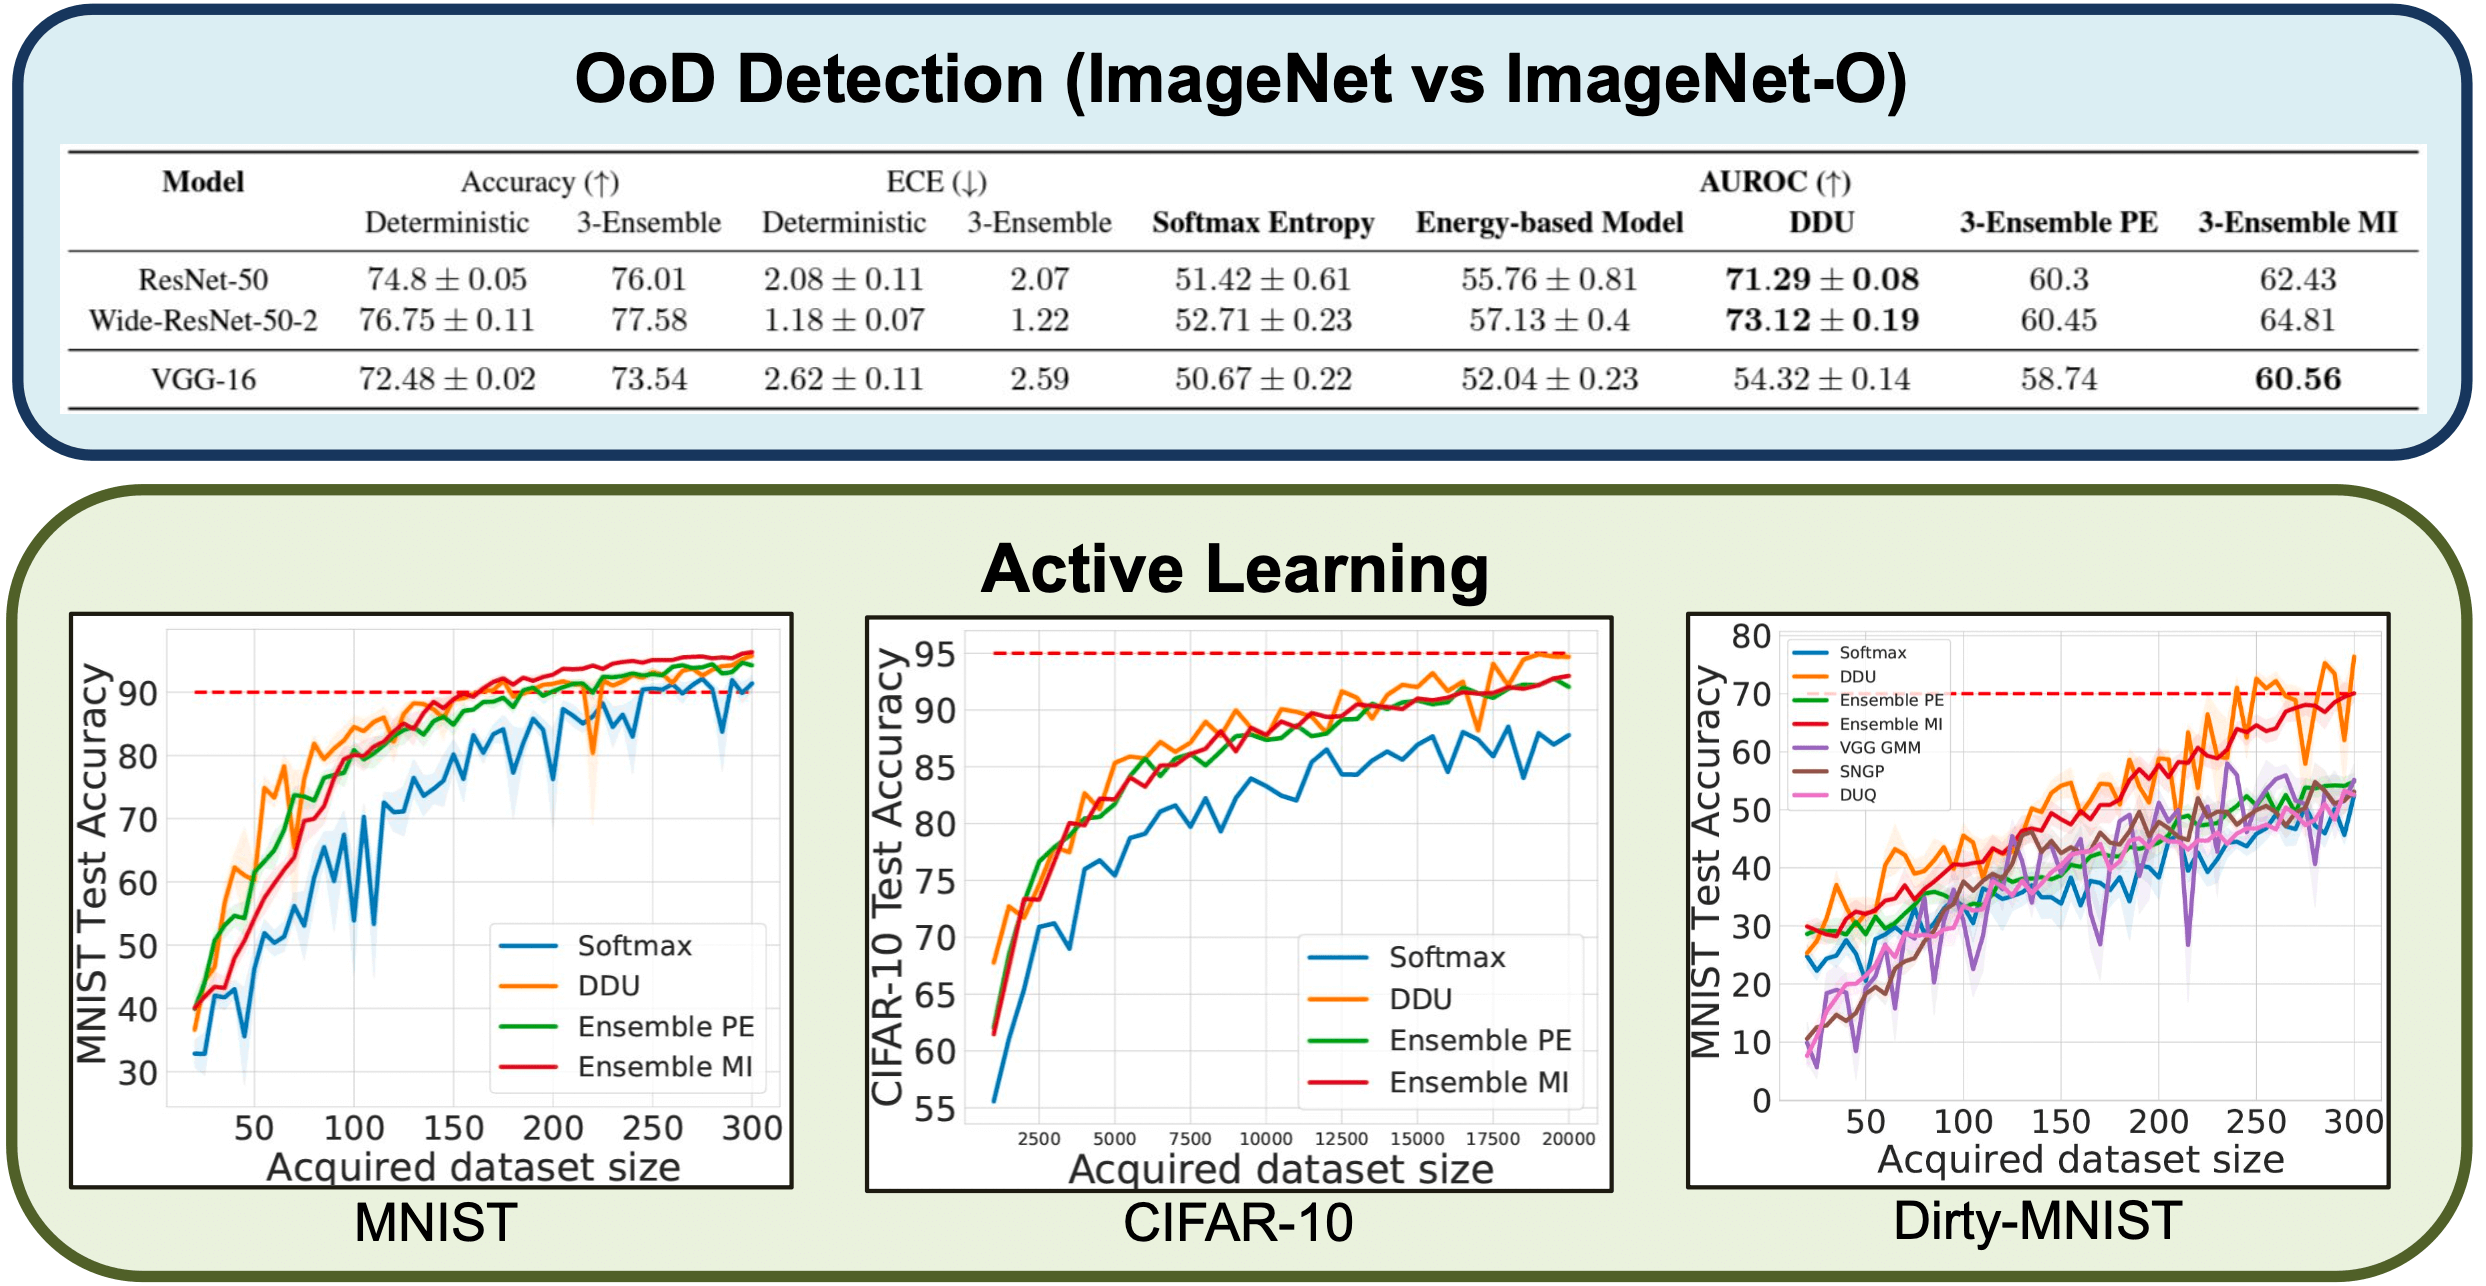 OoD Detection & Active Learning Performance